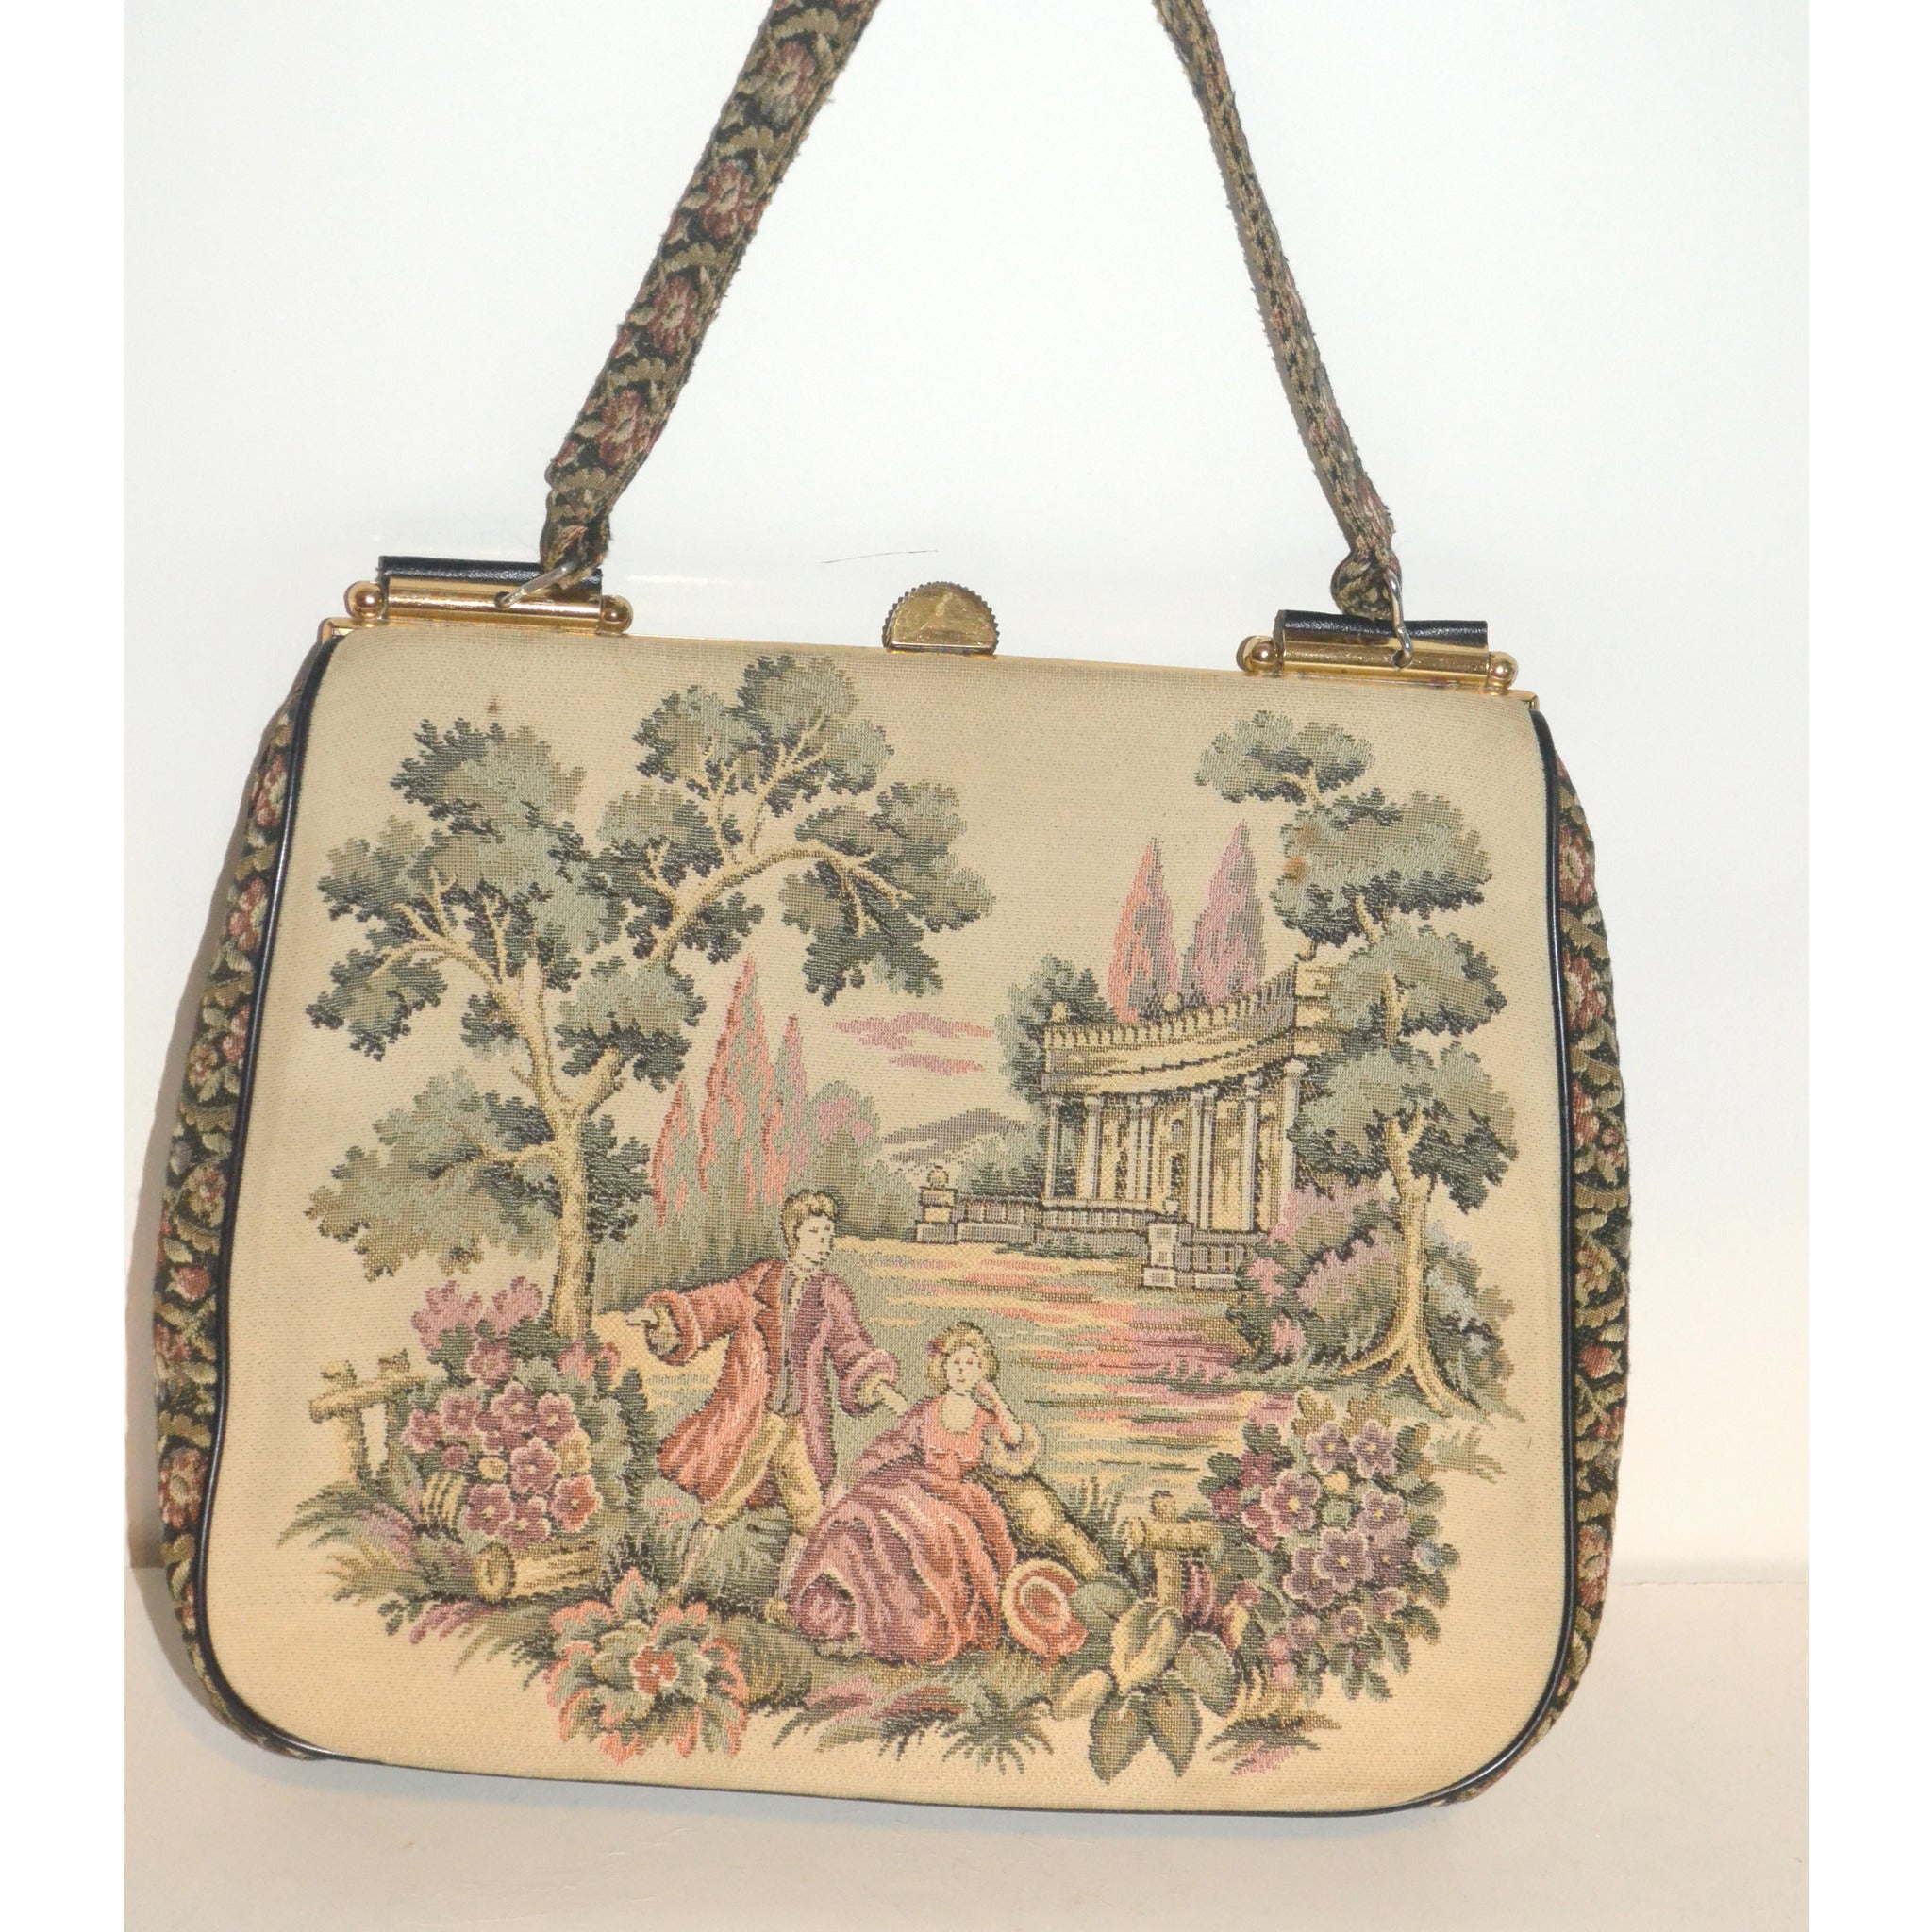 Vintage French Luggage Co. Company Tapestry Leather 